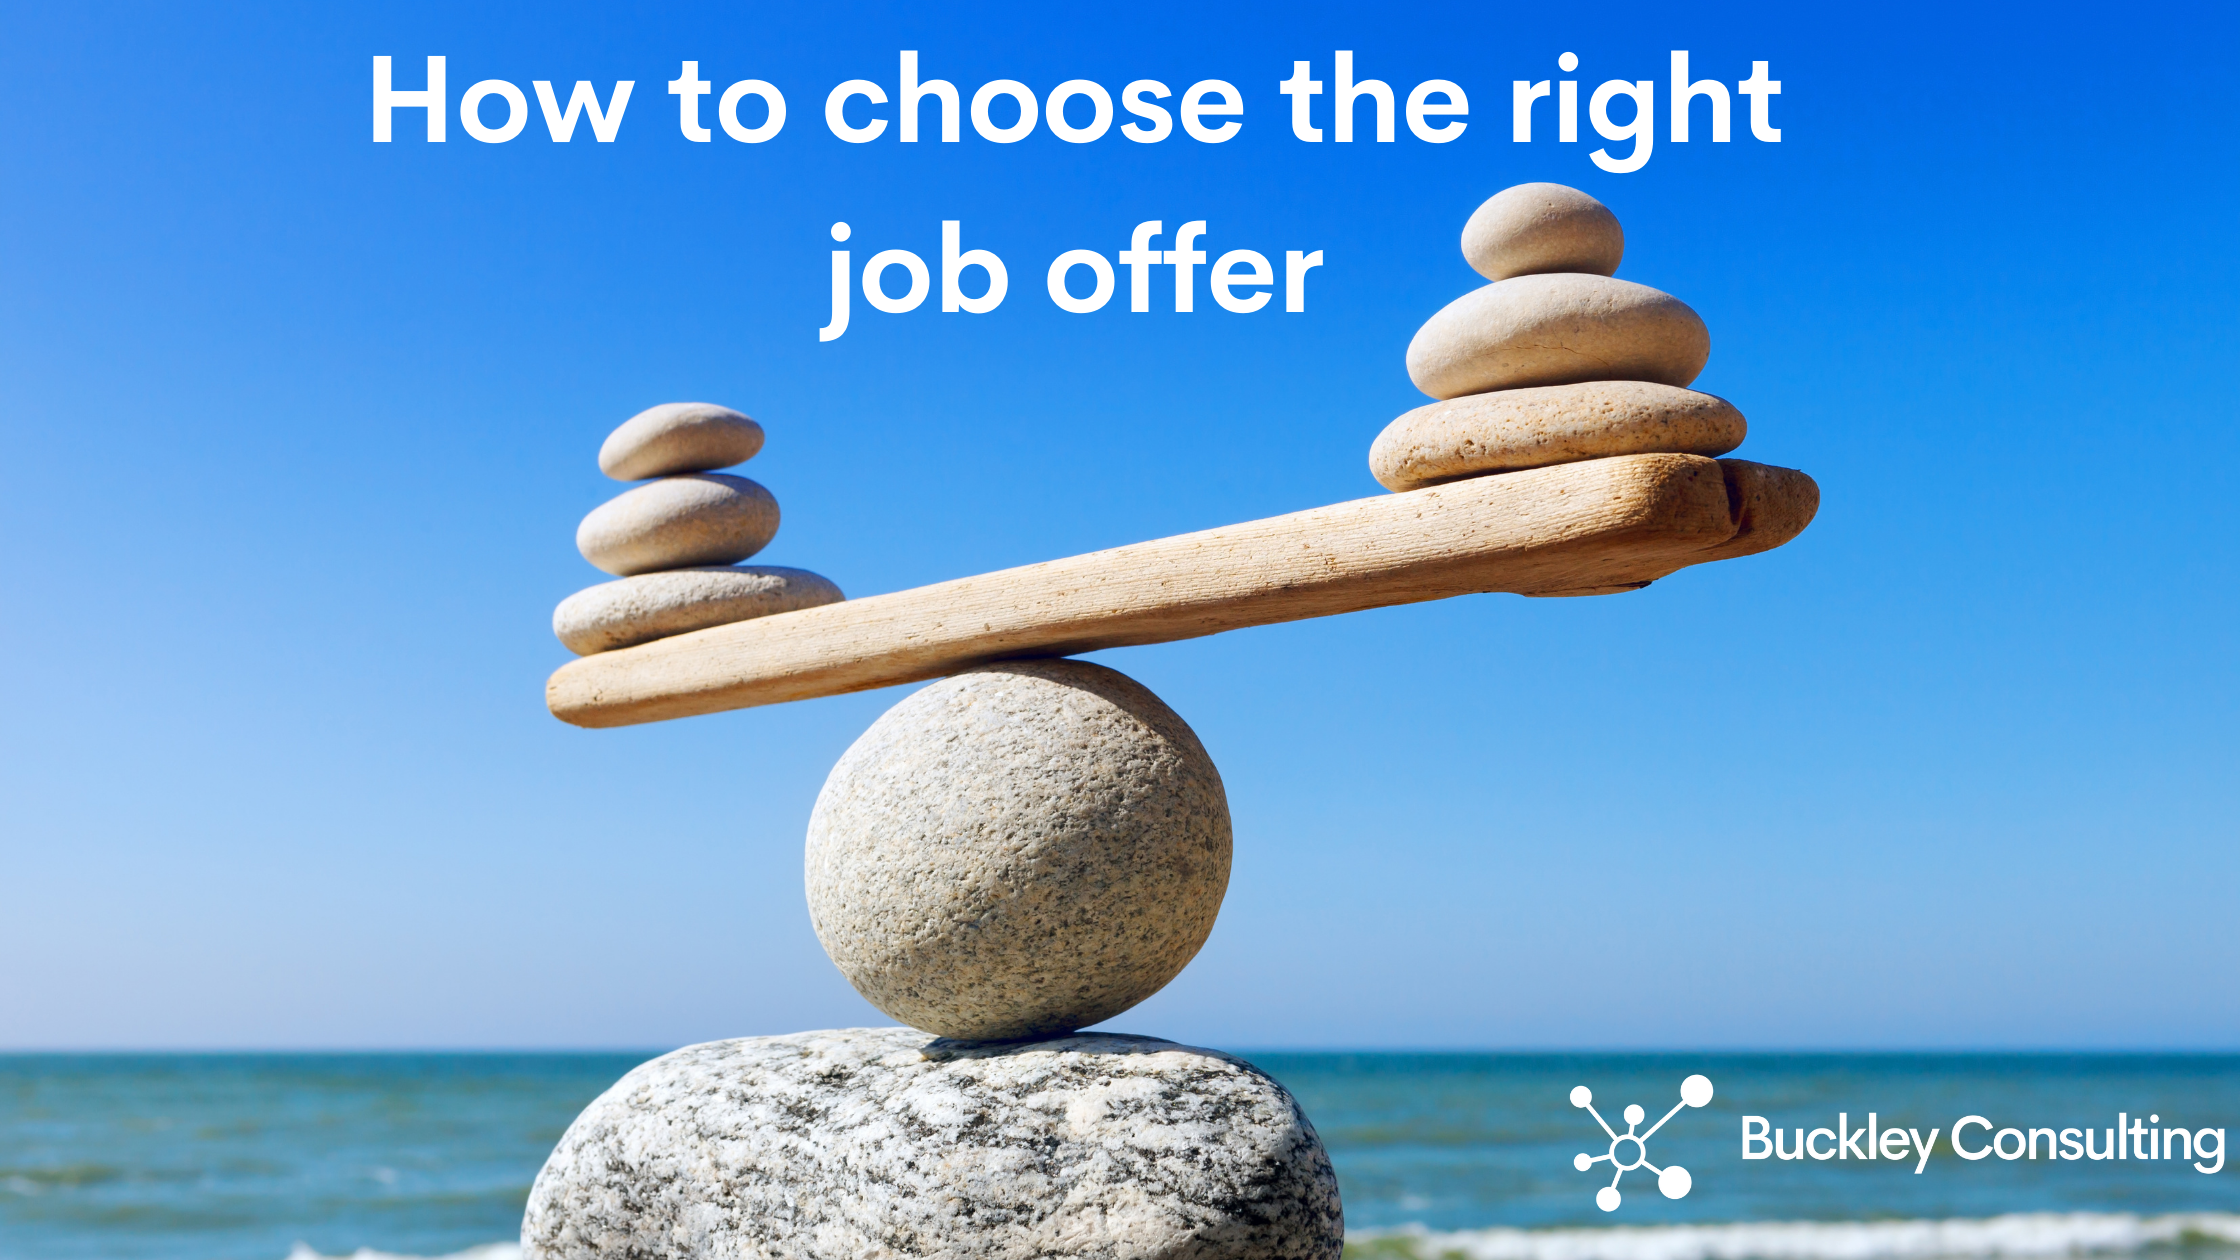 How to choose the right job offer